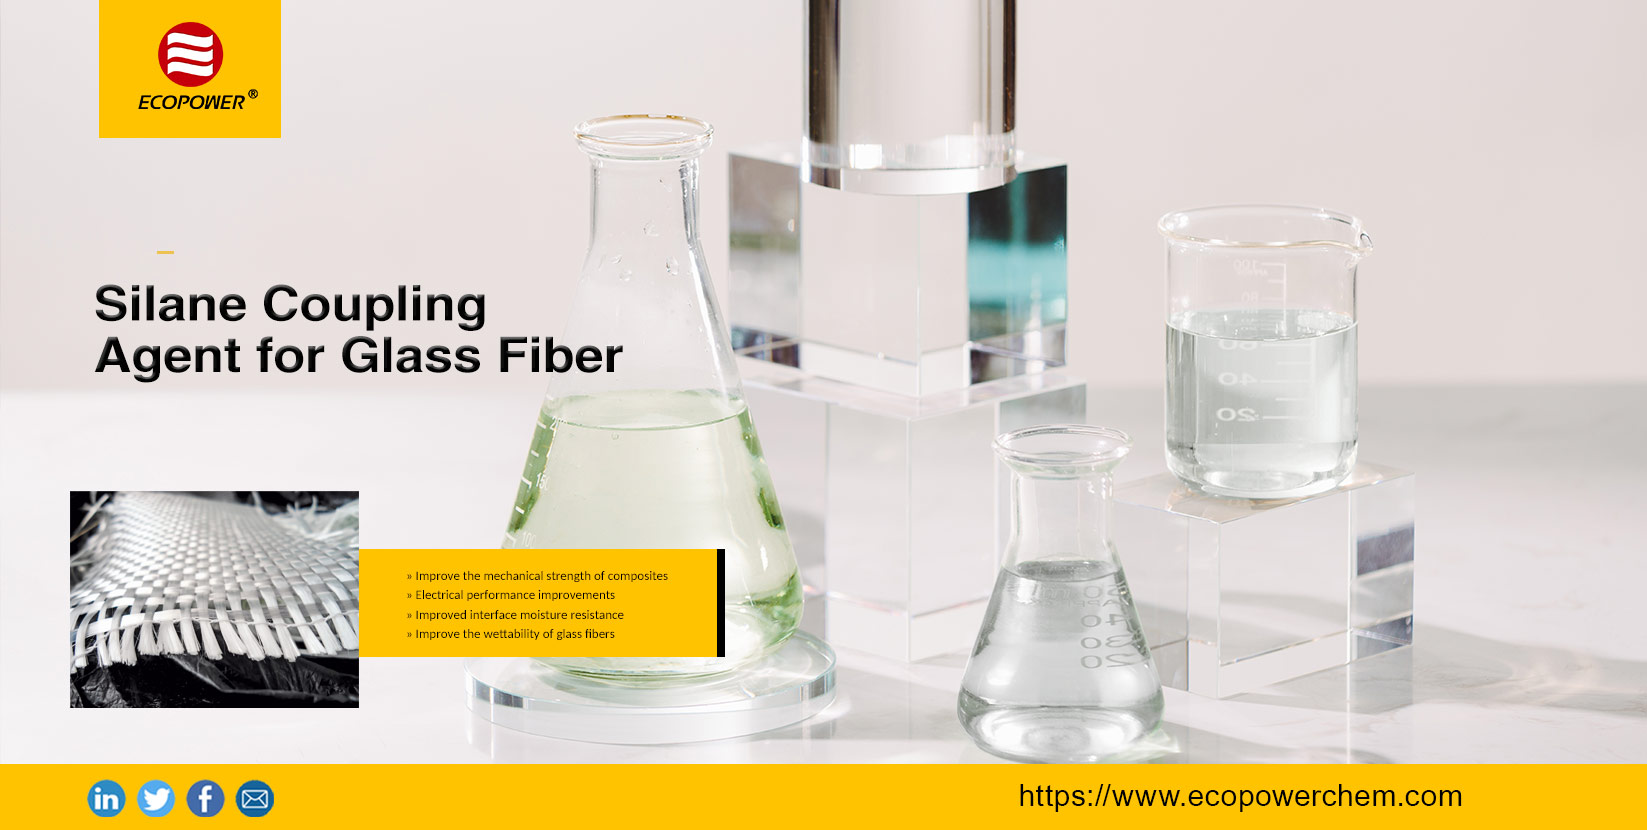 Application of Silane Coupling Agent for Glass Fiber - ECOPOWER